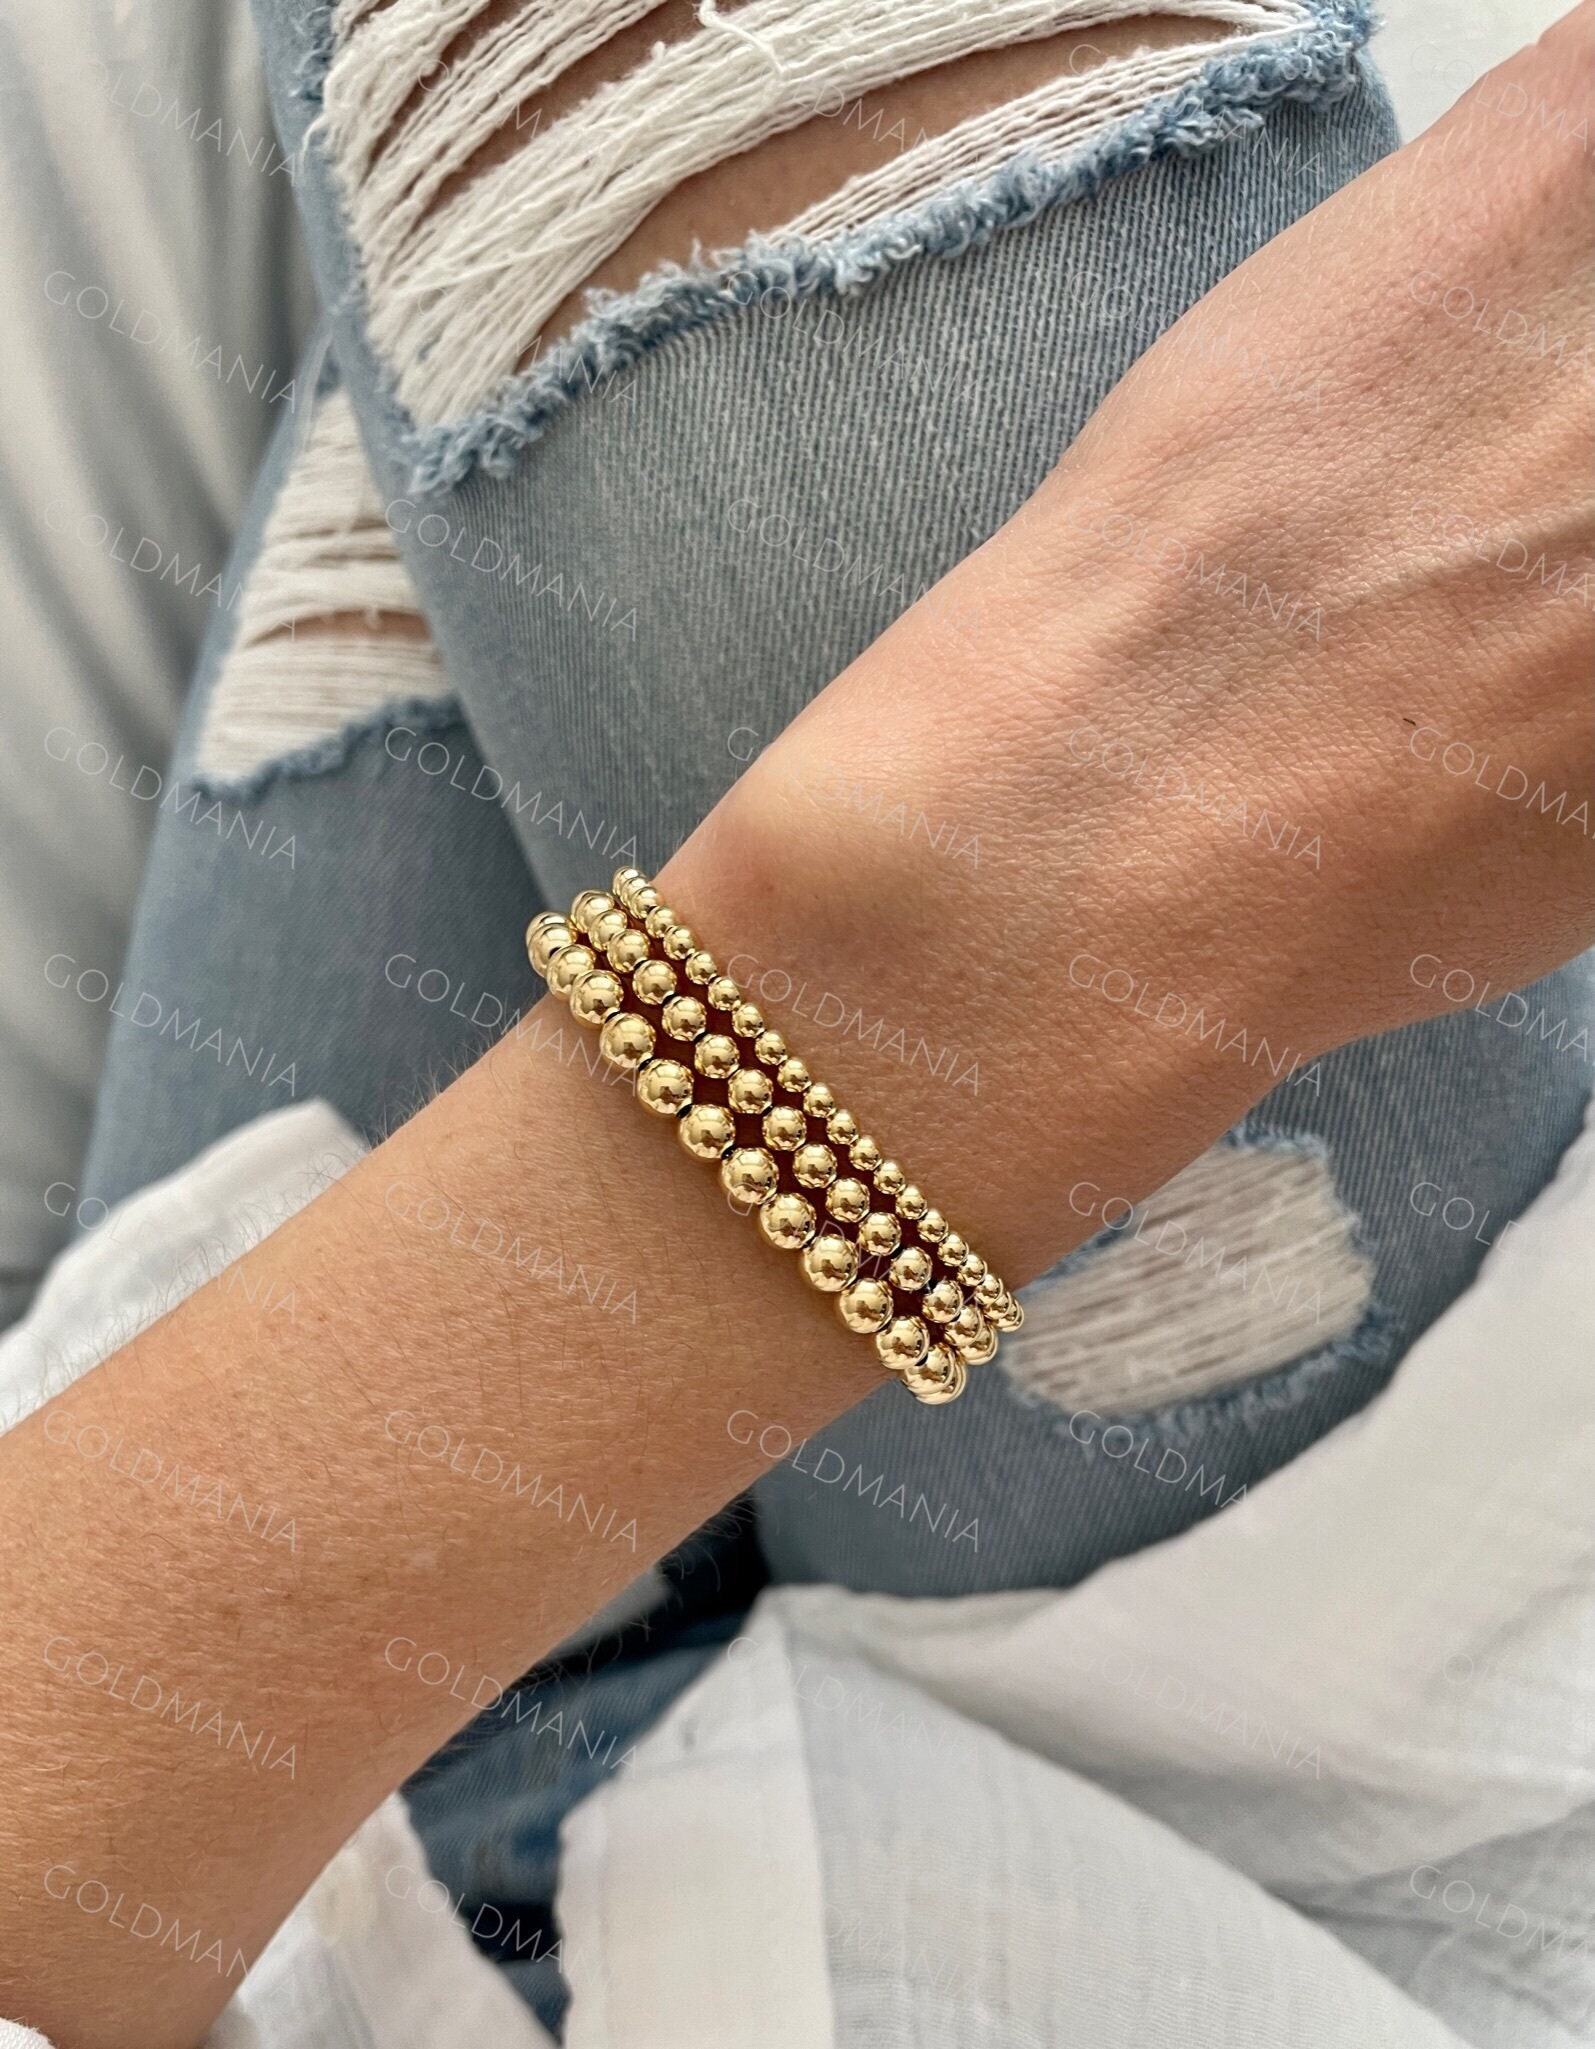 Bracelets - 18K Gold Beaded Ball 5.5” (Fits Up to A 5.25” Wrist Placement) / 5mm